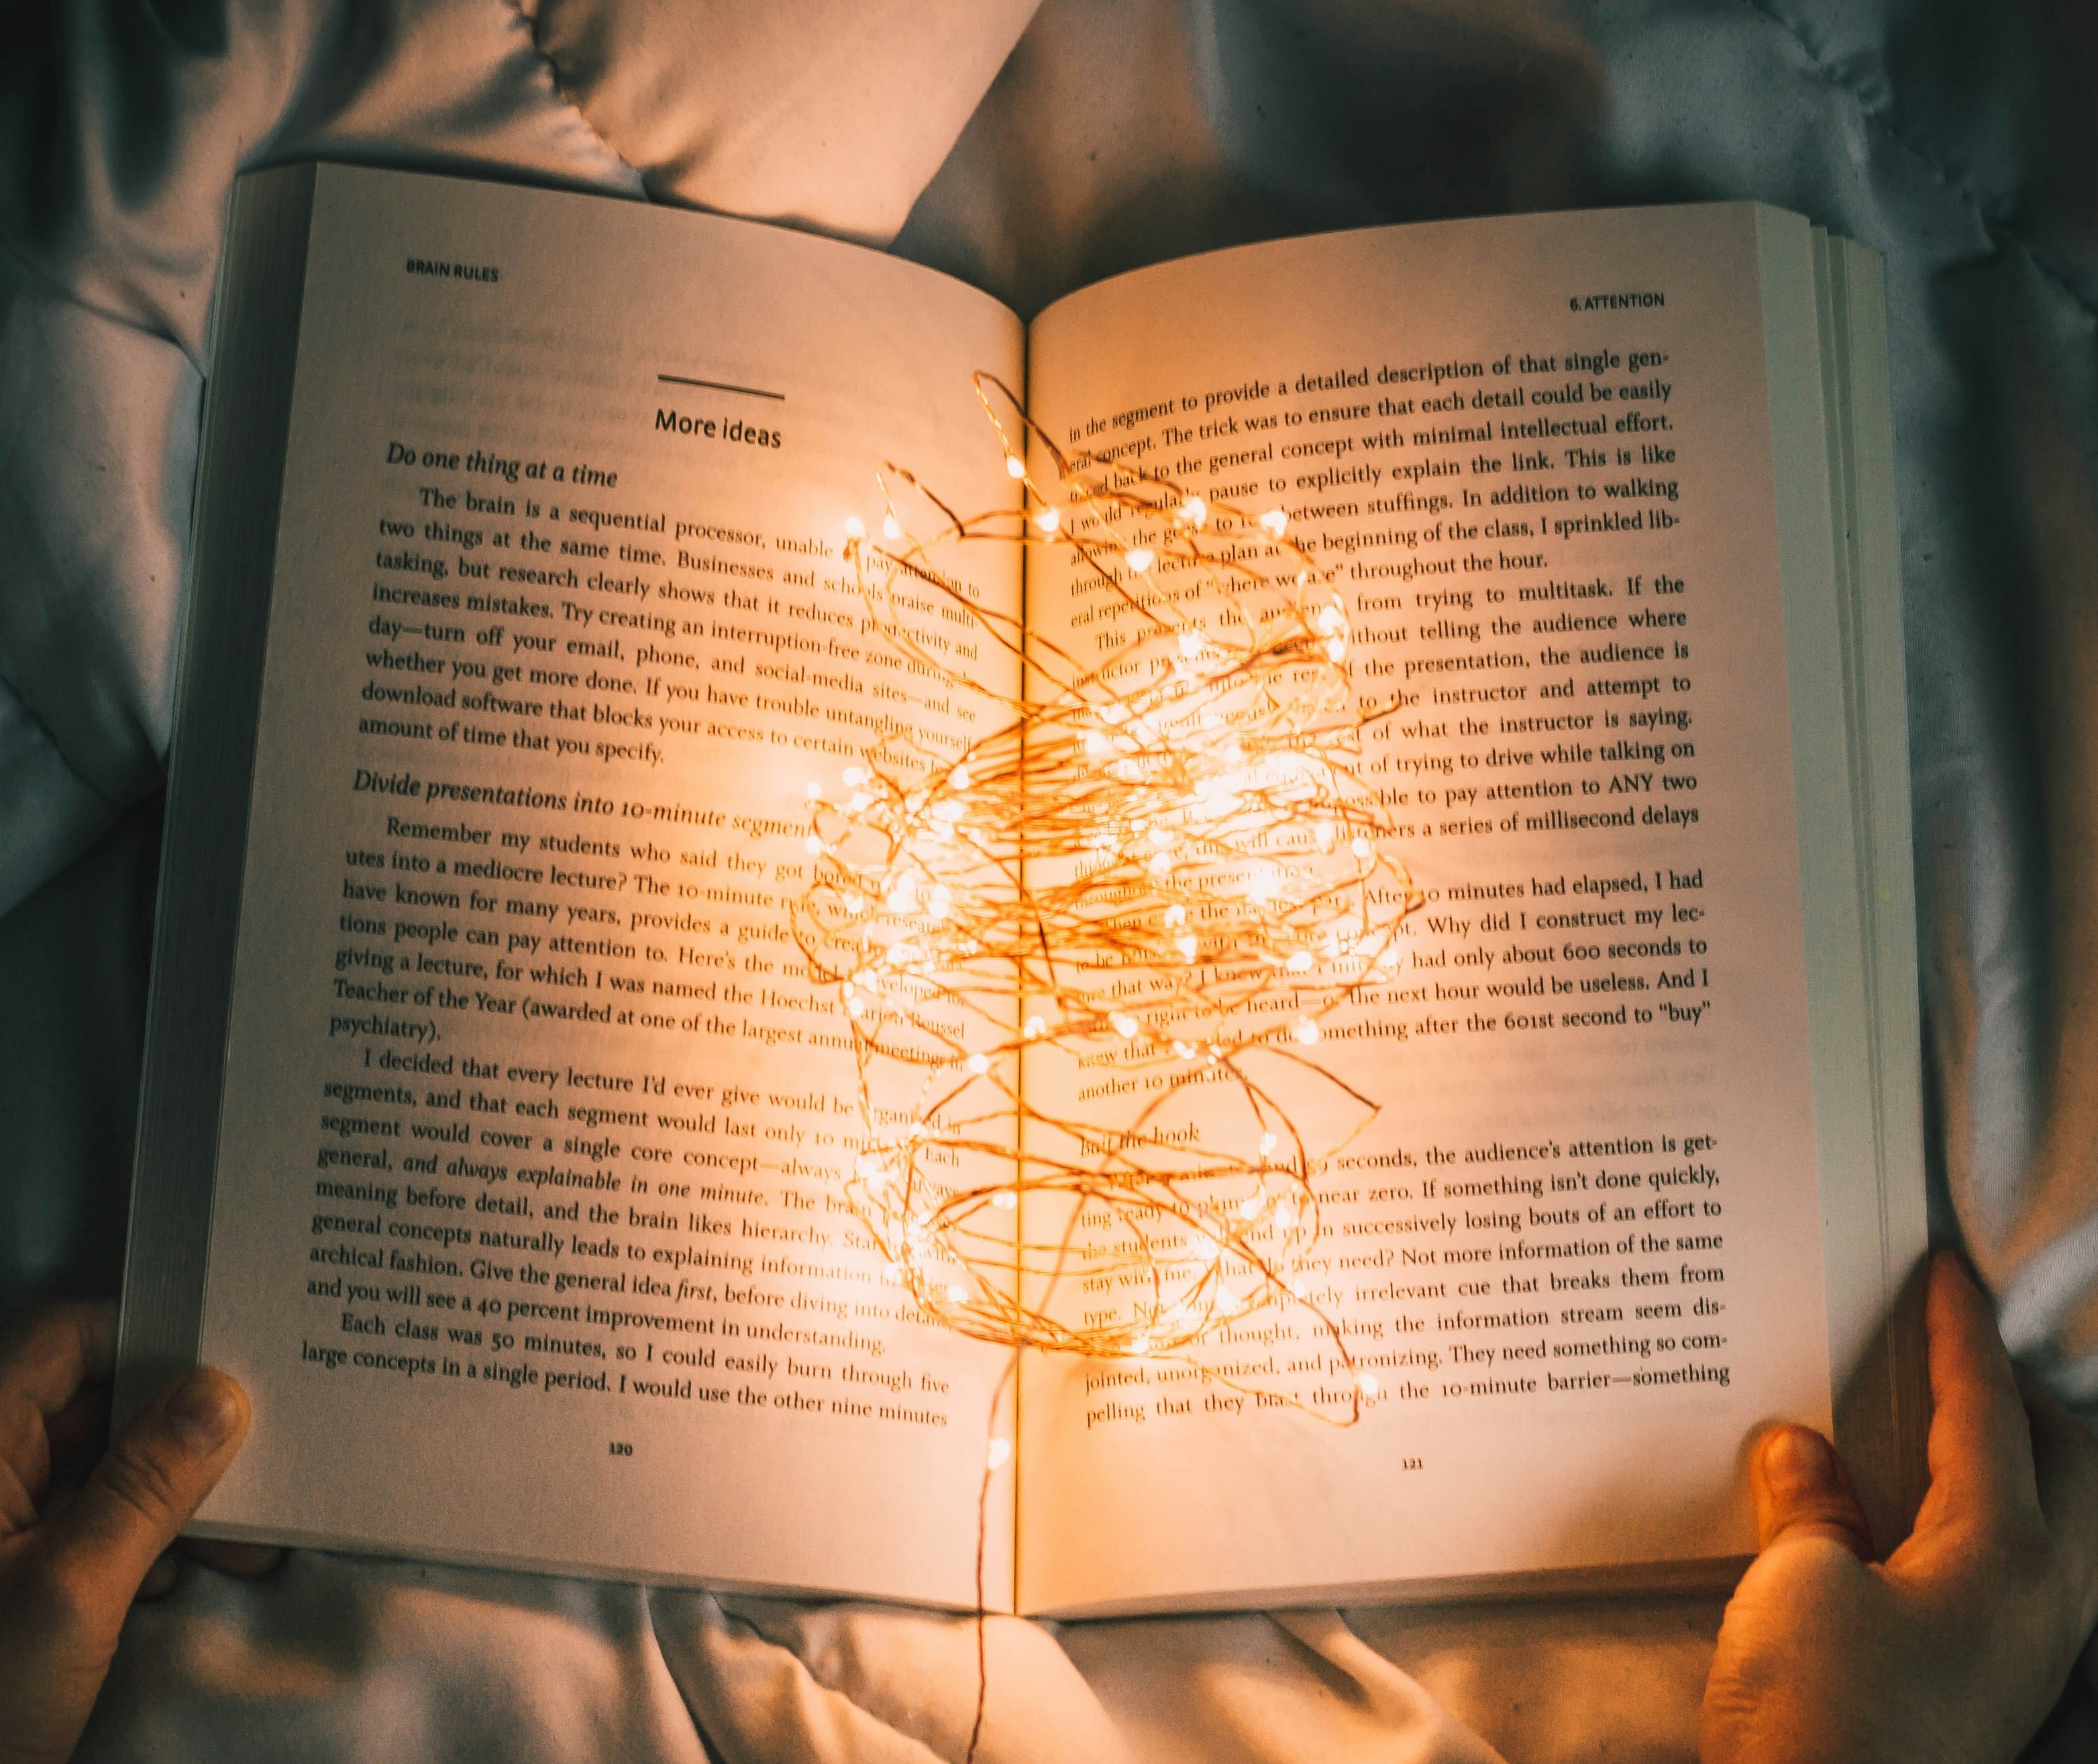 Book with twinkle lights representing creativity